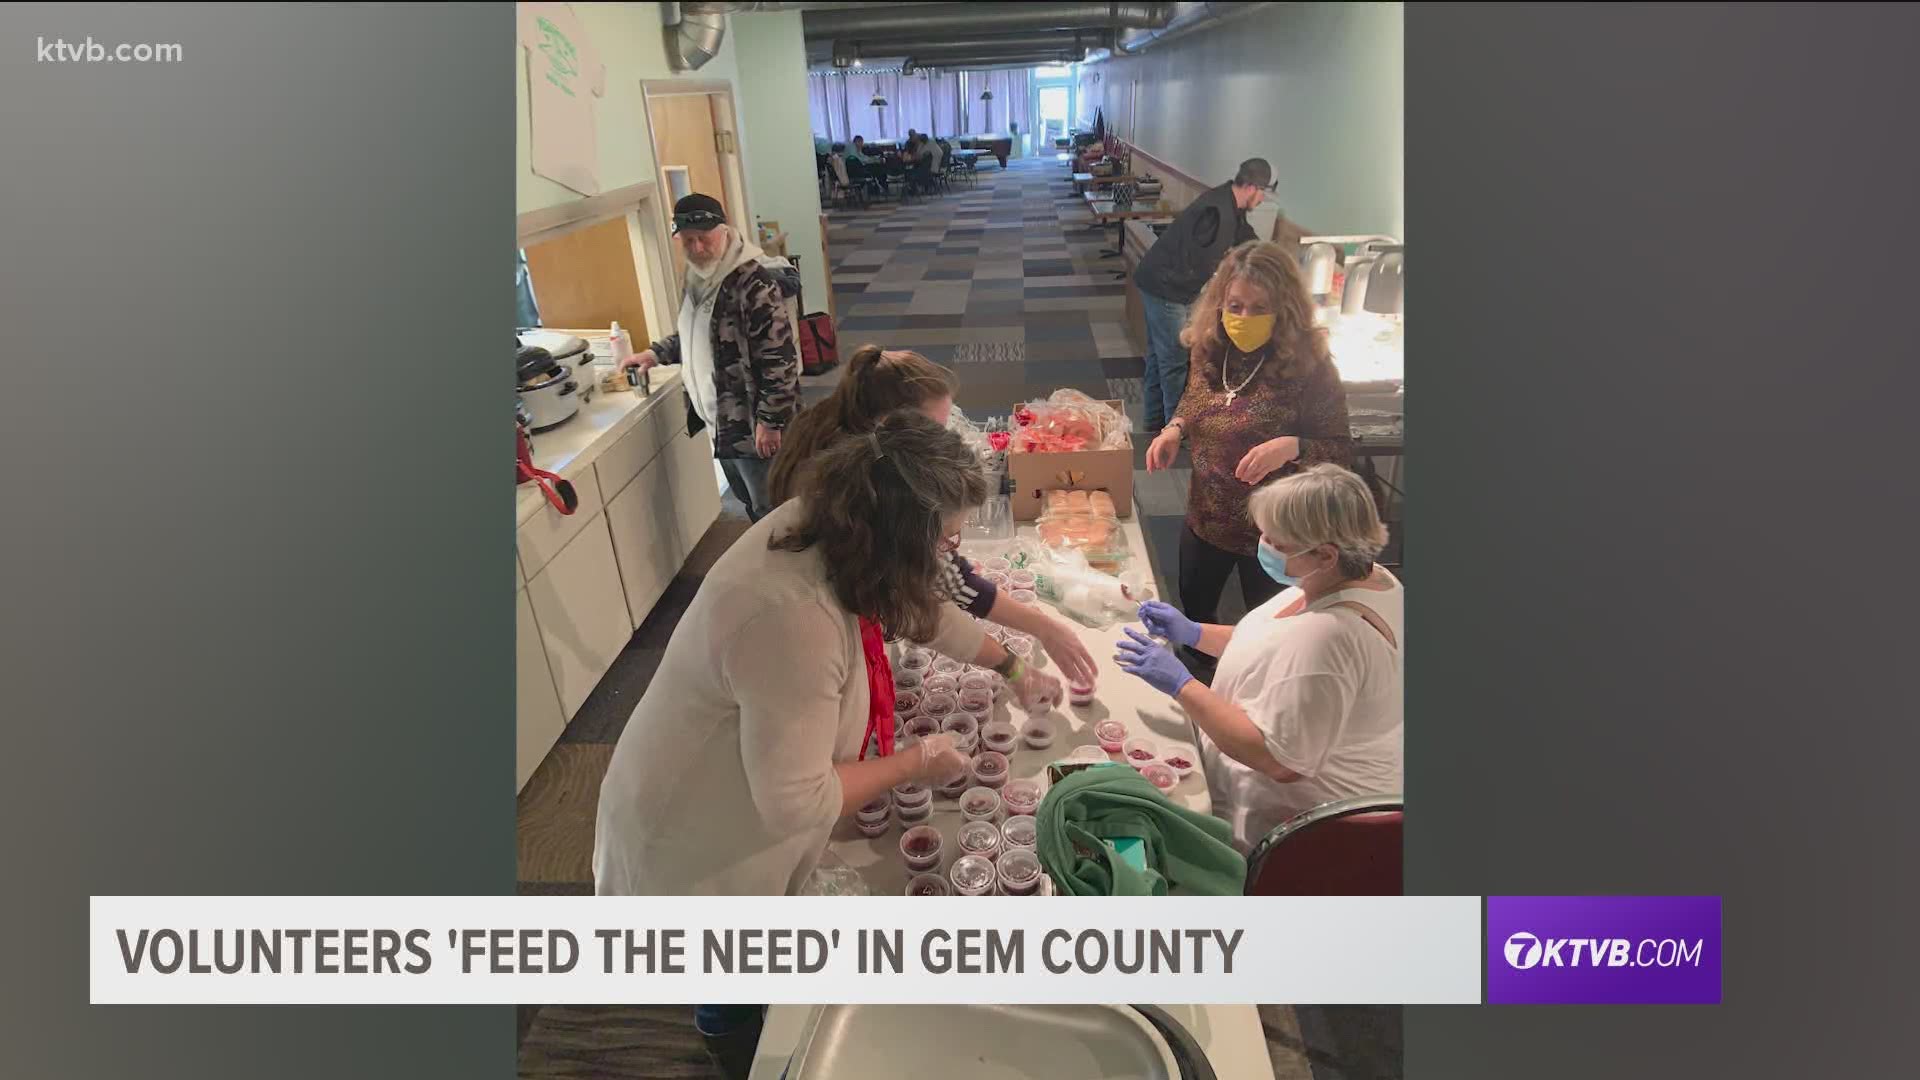 A team from the Gem County Recovery Community Center worked Thursday to create and deliver holiday meals to those in need.